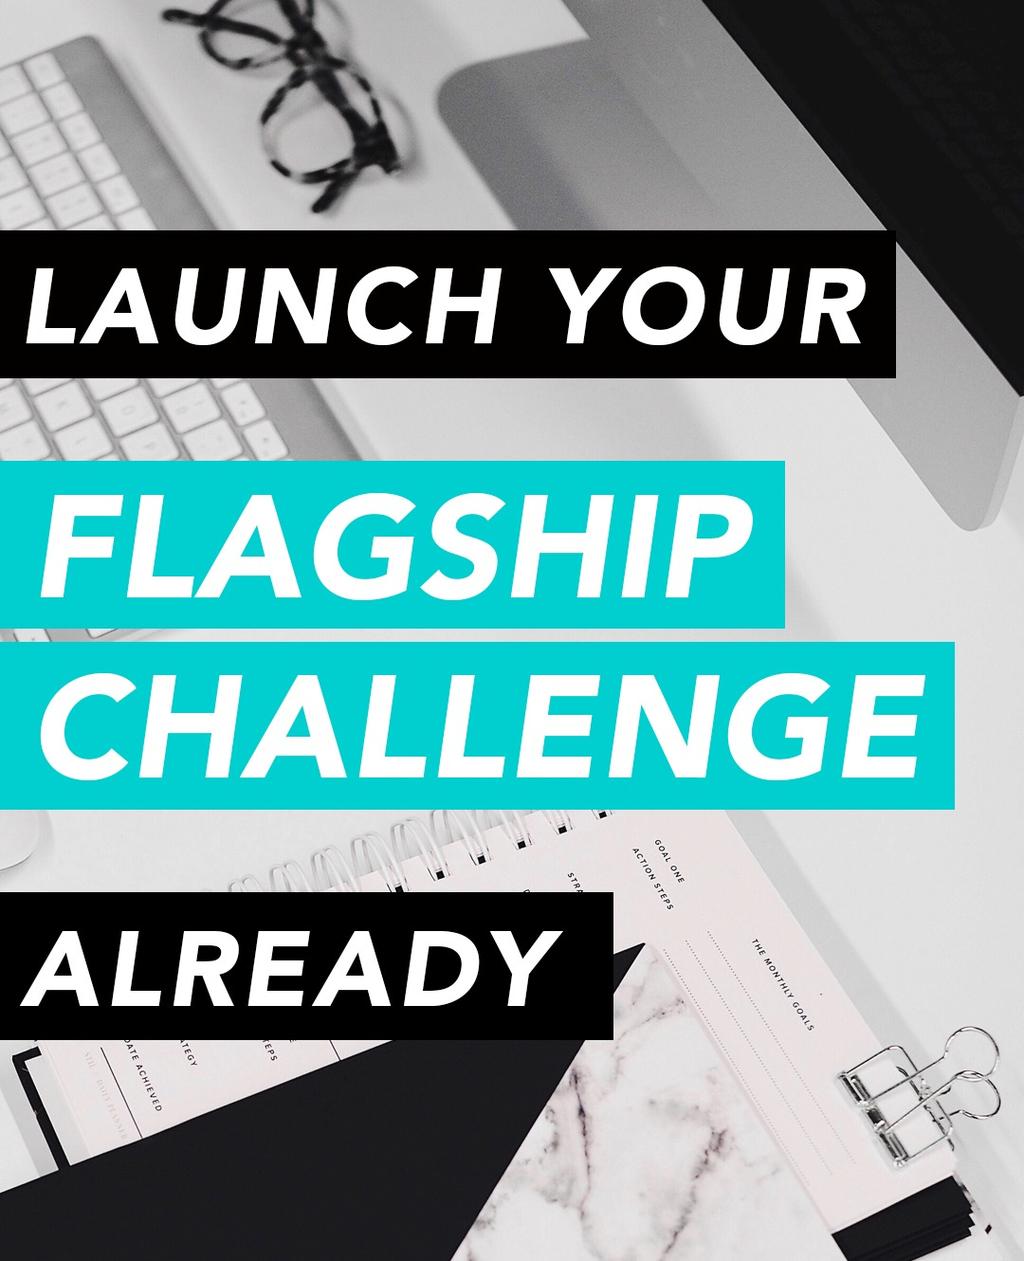 Launch Your Flagship Challenge Already The 10-Step Process to Help You Create and Host an Engaging and Profitable Online Challenge for Your Audience $195 if sold separately Launch Your Flagship